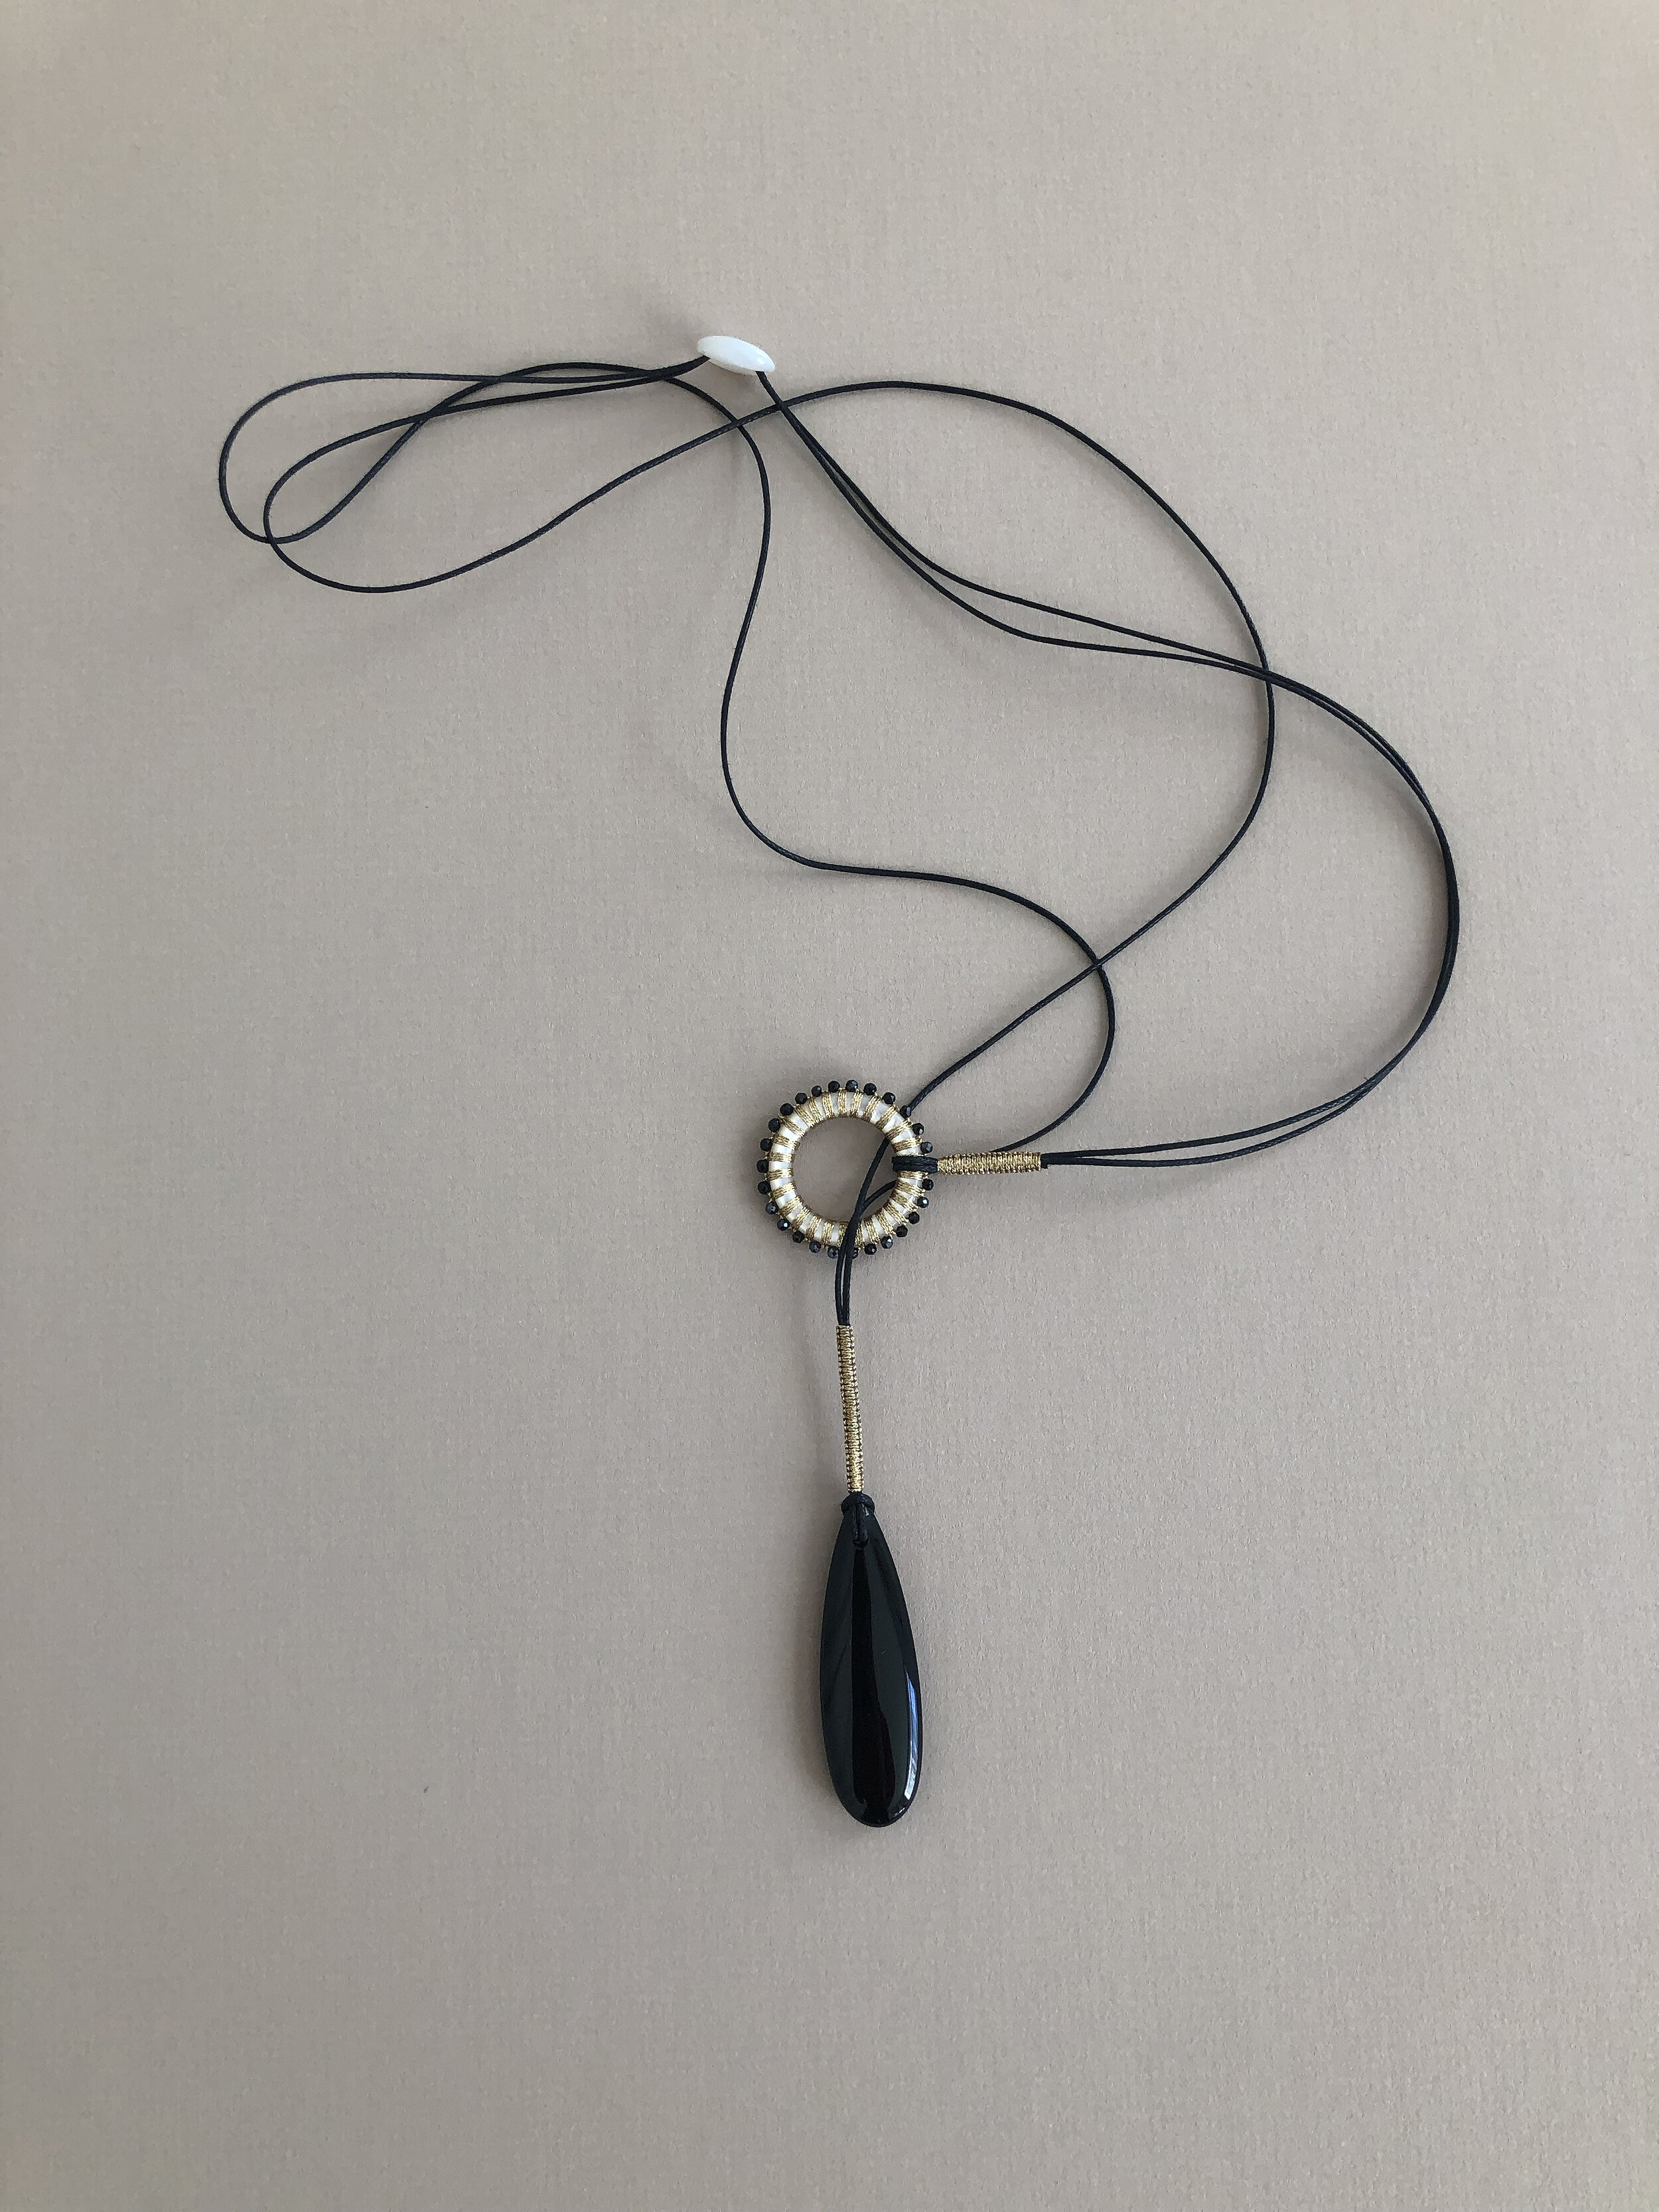 NJY107 BLACK AGATE DROP LARIAT WITH 25MM SOUTH SEA MOTHER OF PEARL  (PINCTADAD MAXIMA AUSTRALIA) HAND WOVEN WITH BLACK SPINEL — SIMON ALCANTARA  LLC